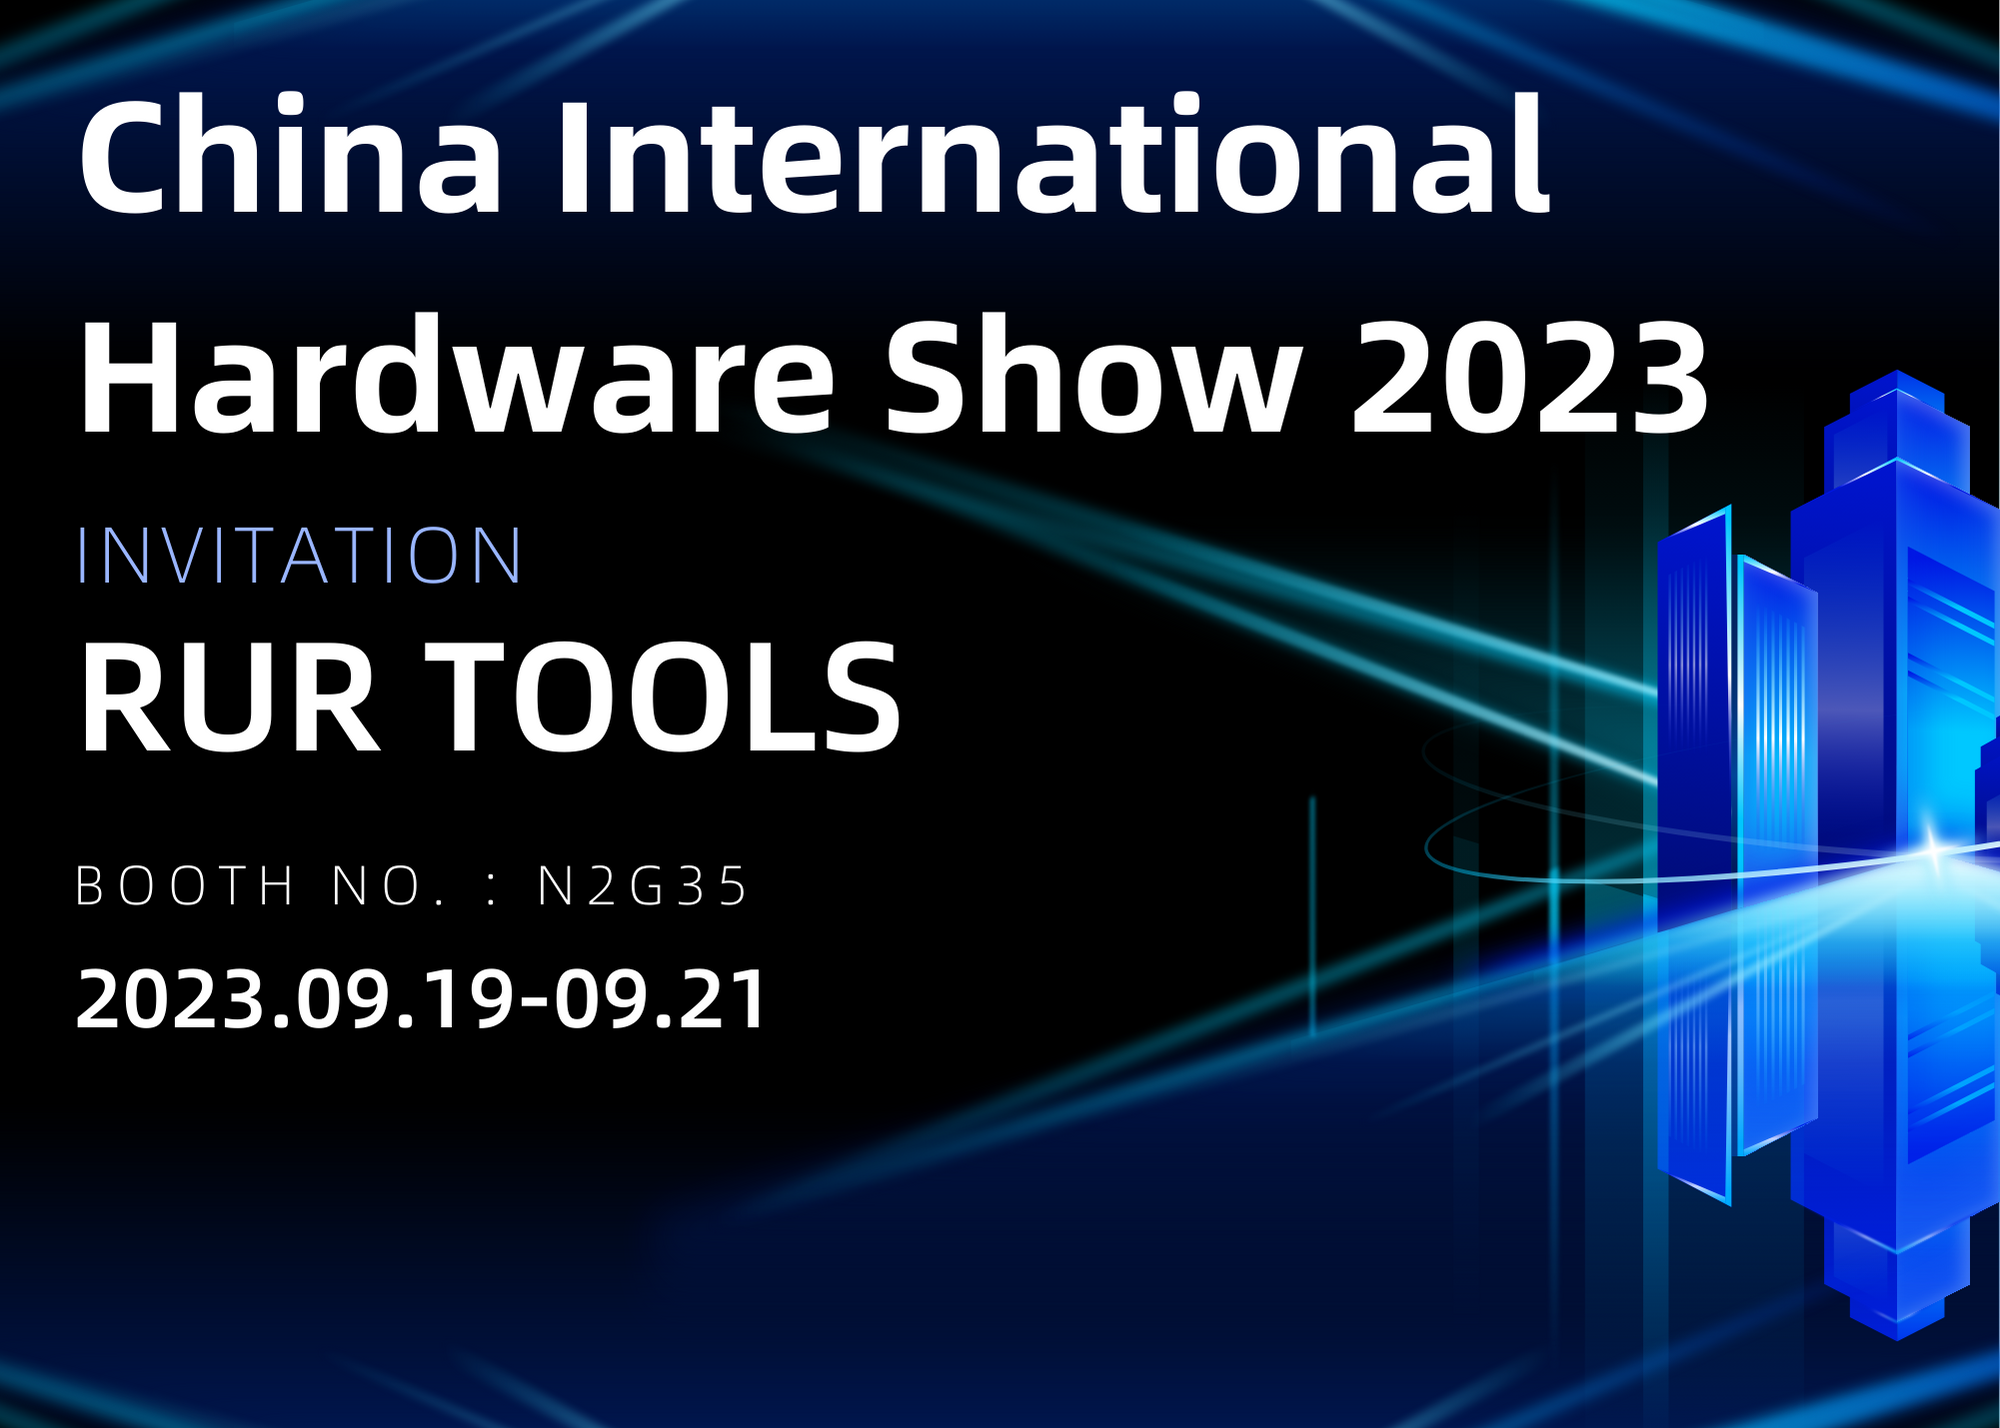 RUR Tools will Participate in China International Hardware Show 2023